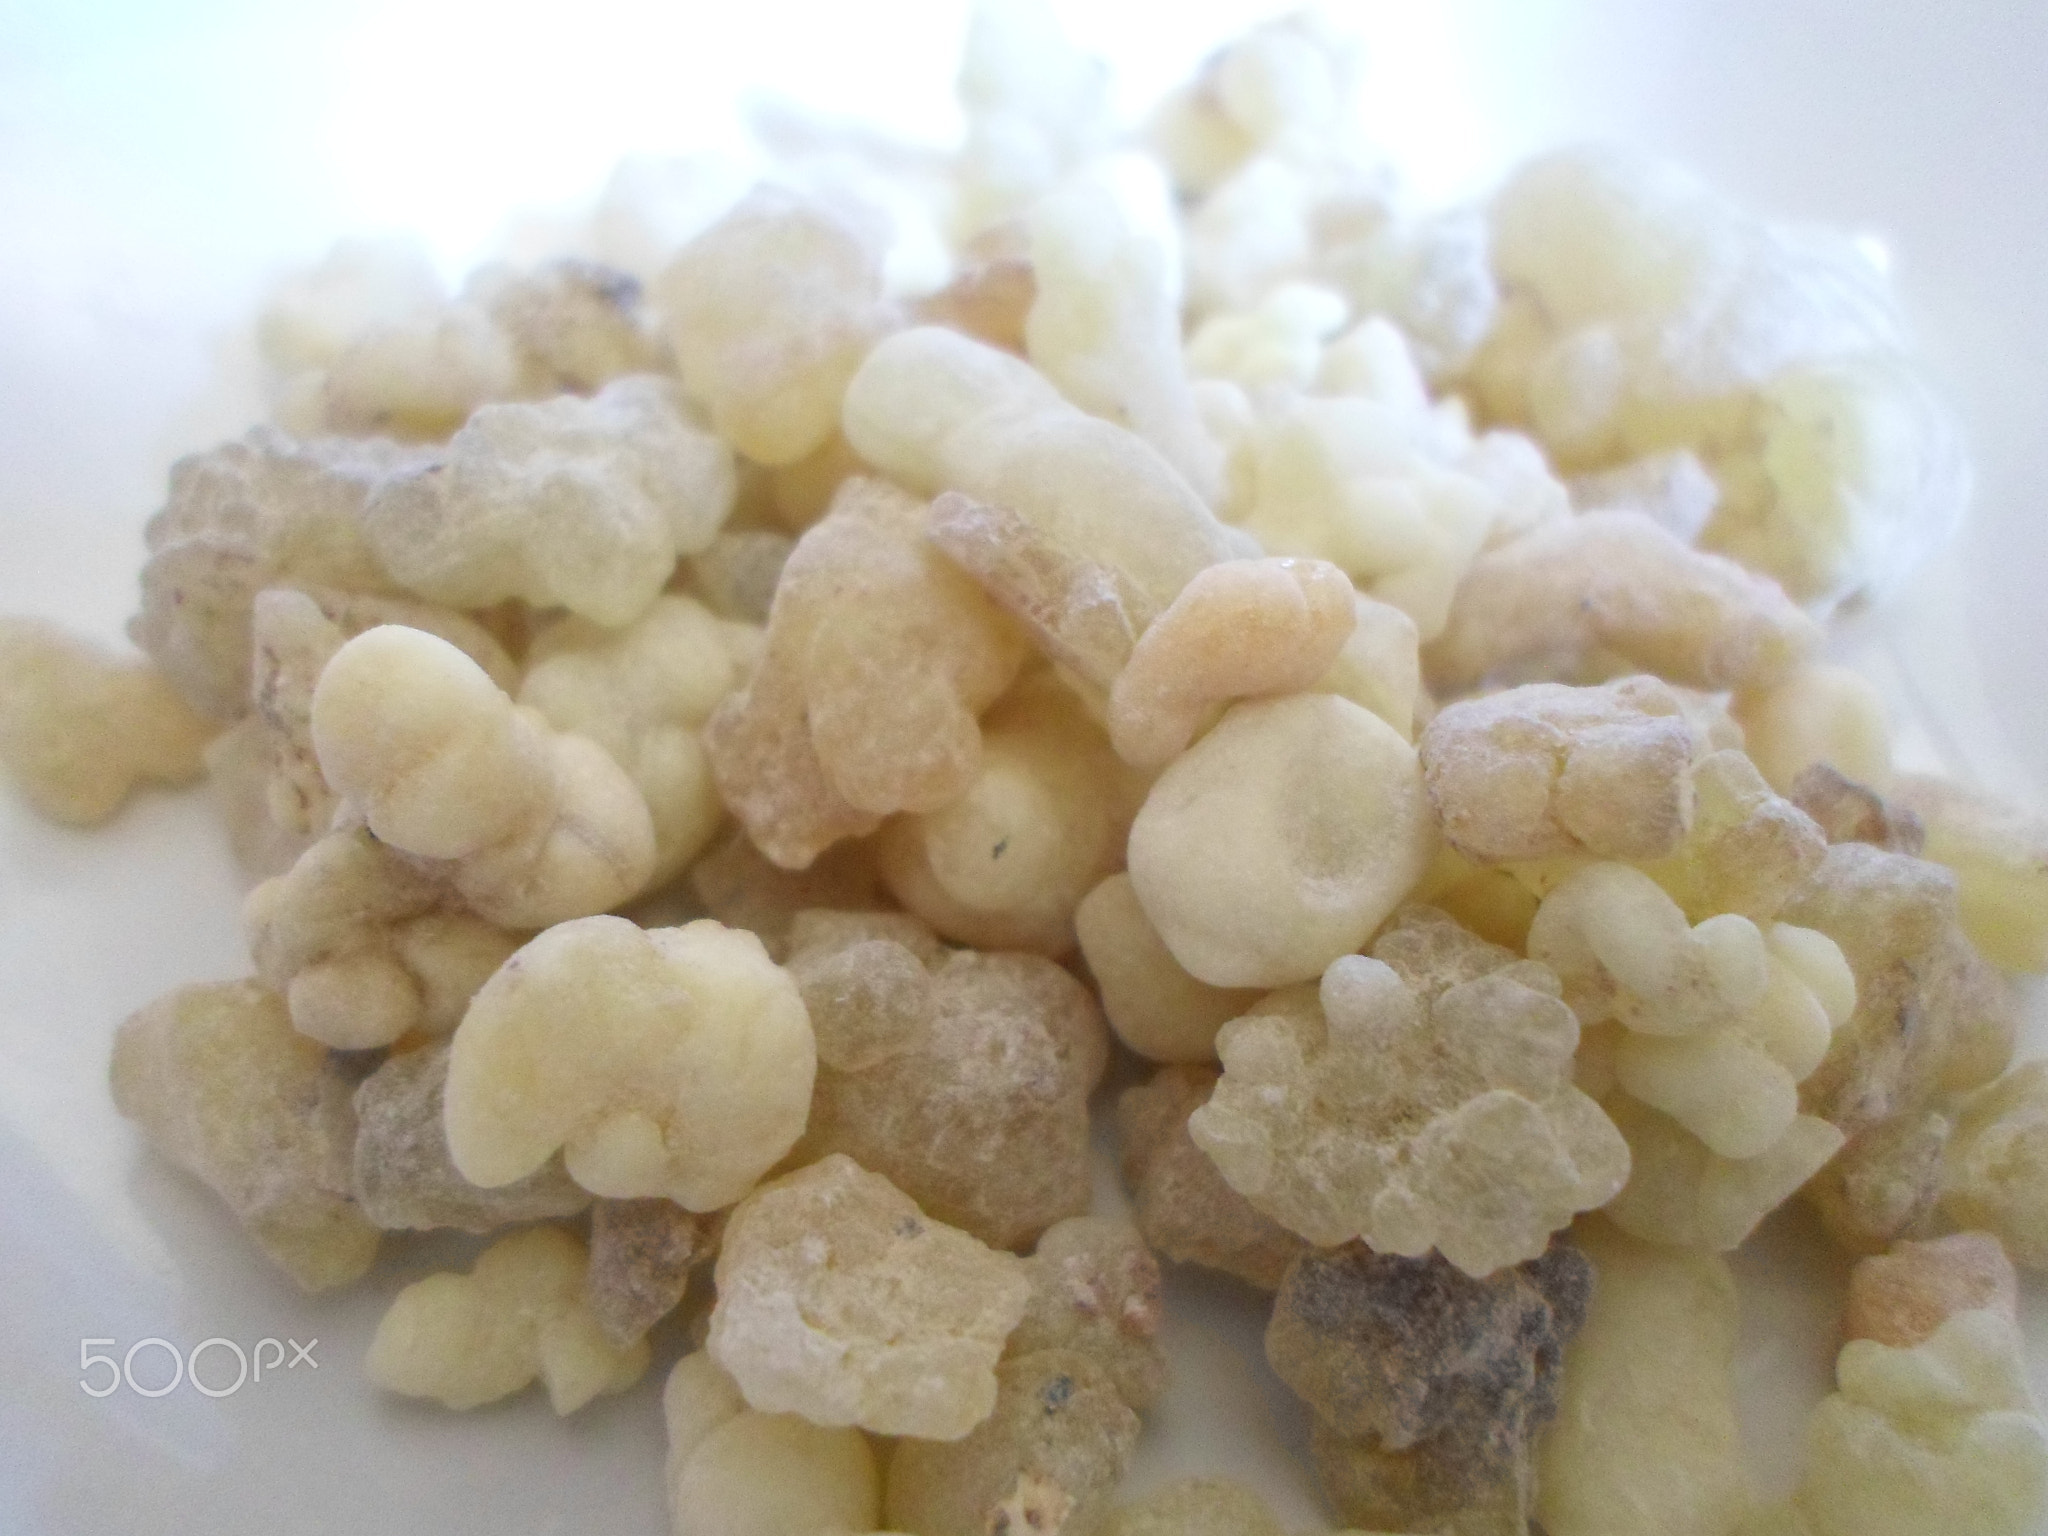 Frankincense For the treatment of erectile dysfunc